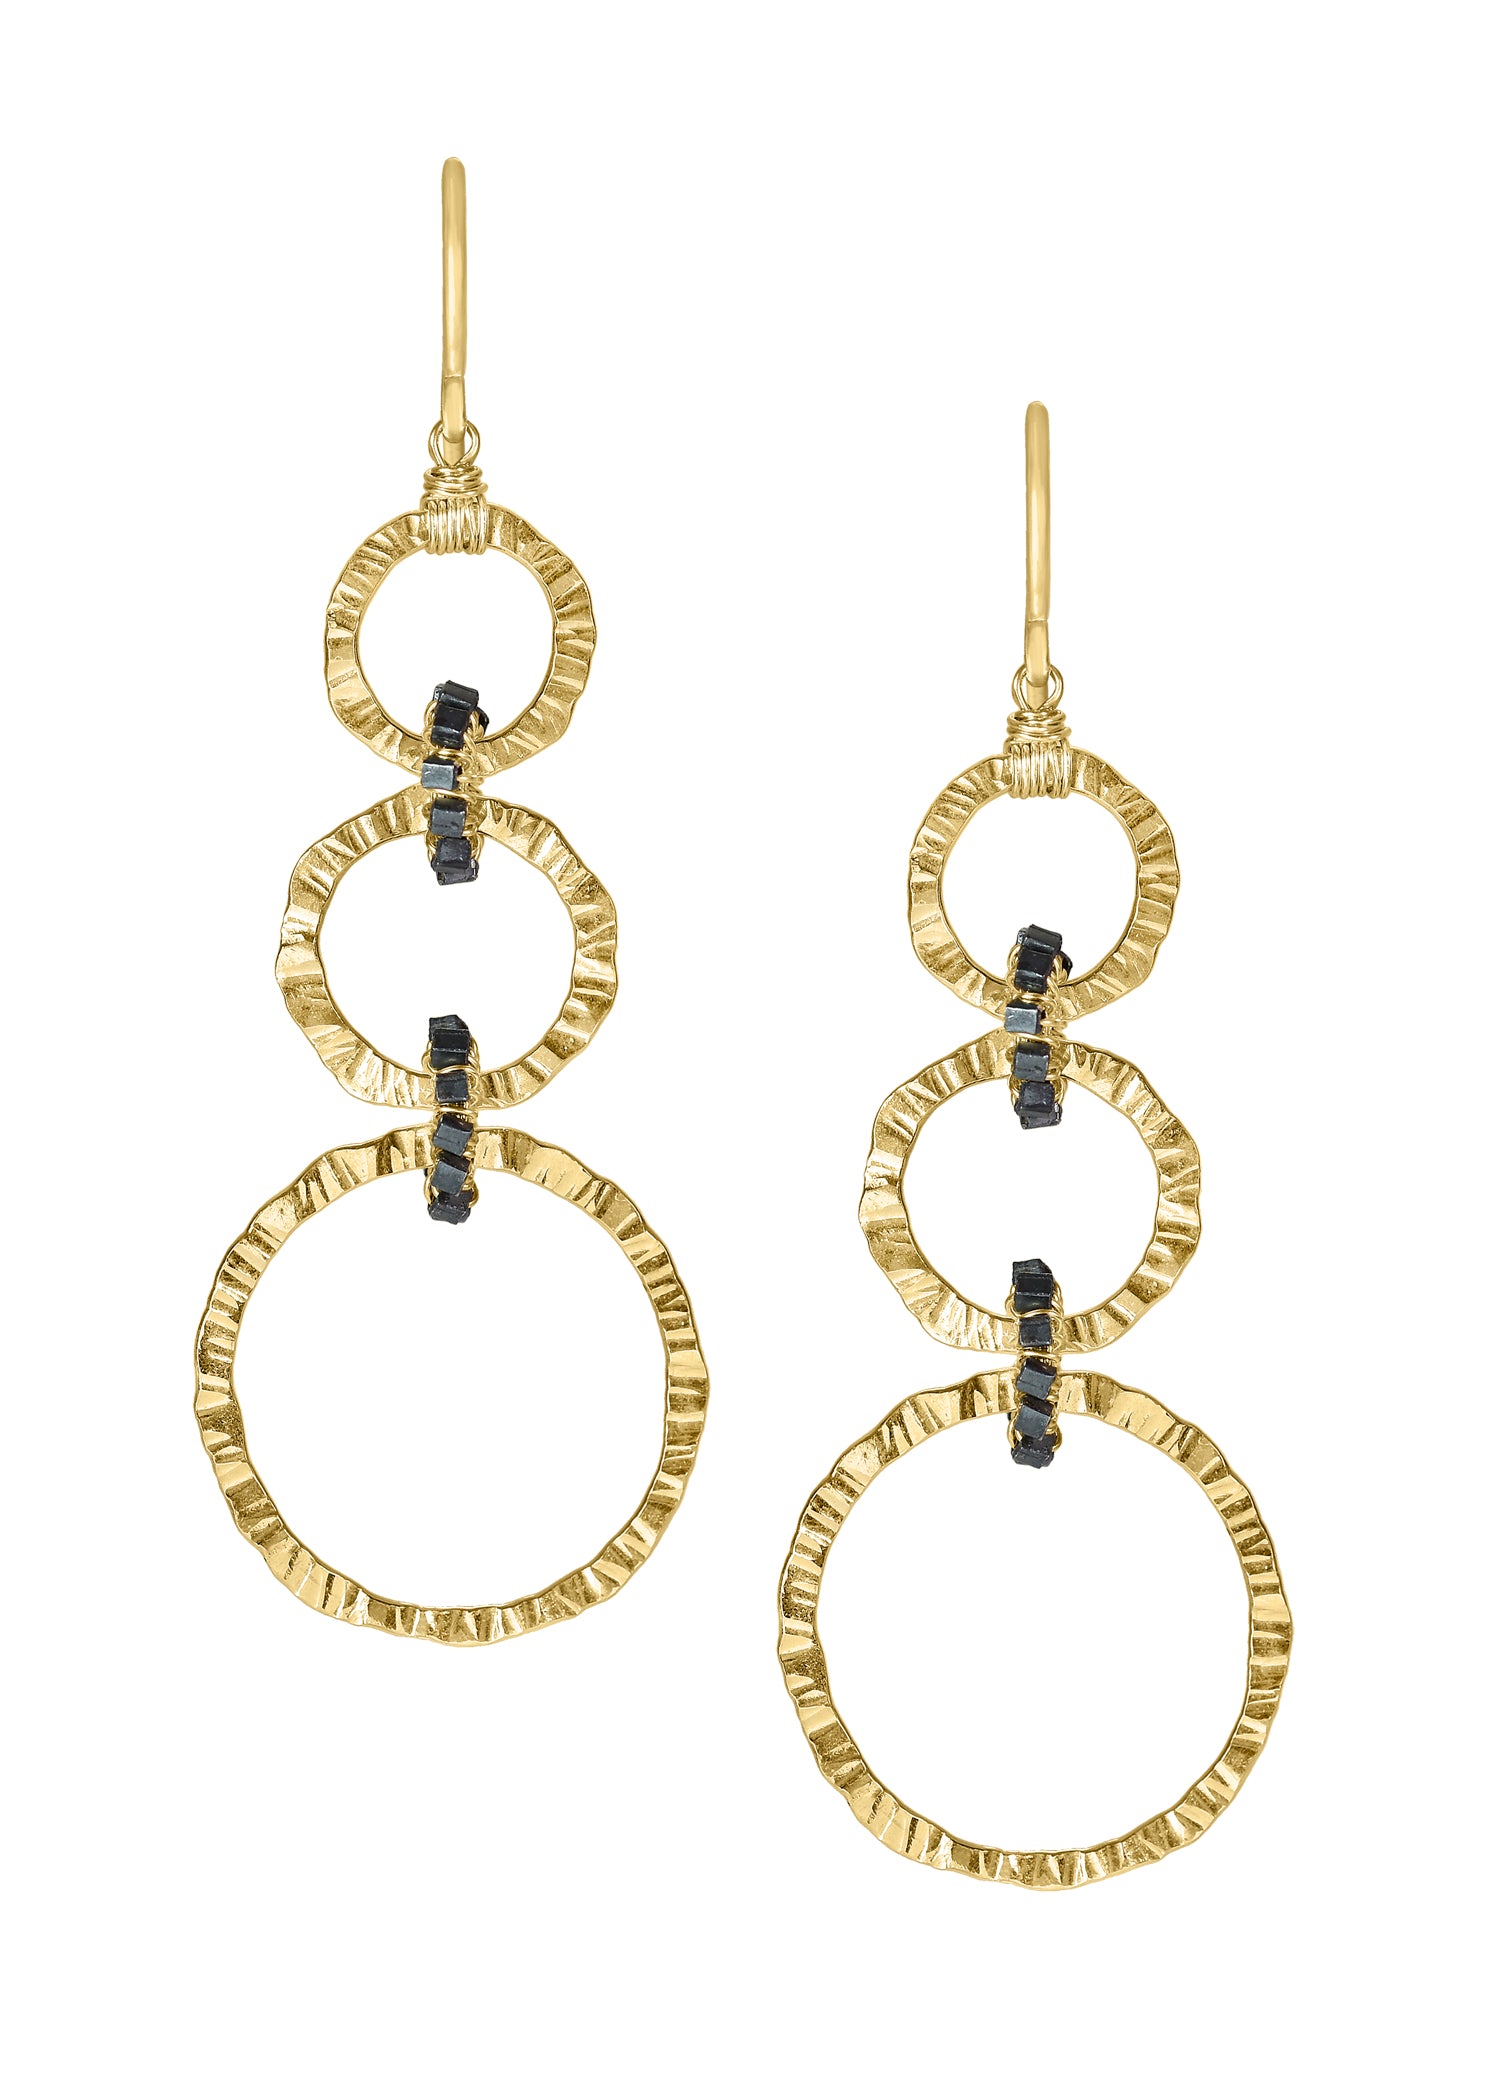 14k gold fill Blackened sterling silver Mixed metal Earrings measure 2" in length (including the ear wires) Top drop diameter is 3/8", middle drop diameter is 7/16" in diameter, bottom drop is 3/4" in diameter Handmade in our Los Angeles studio